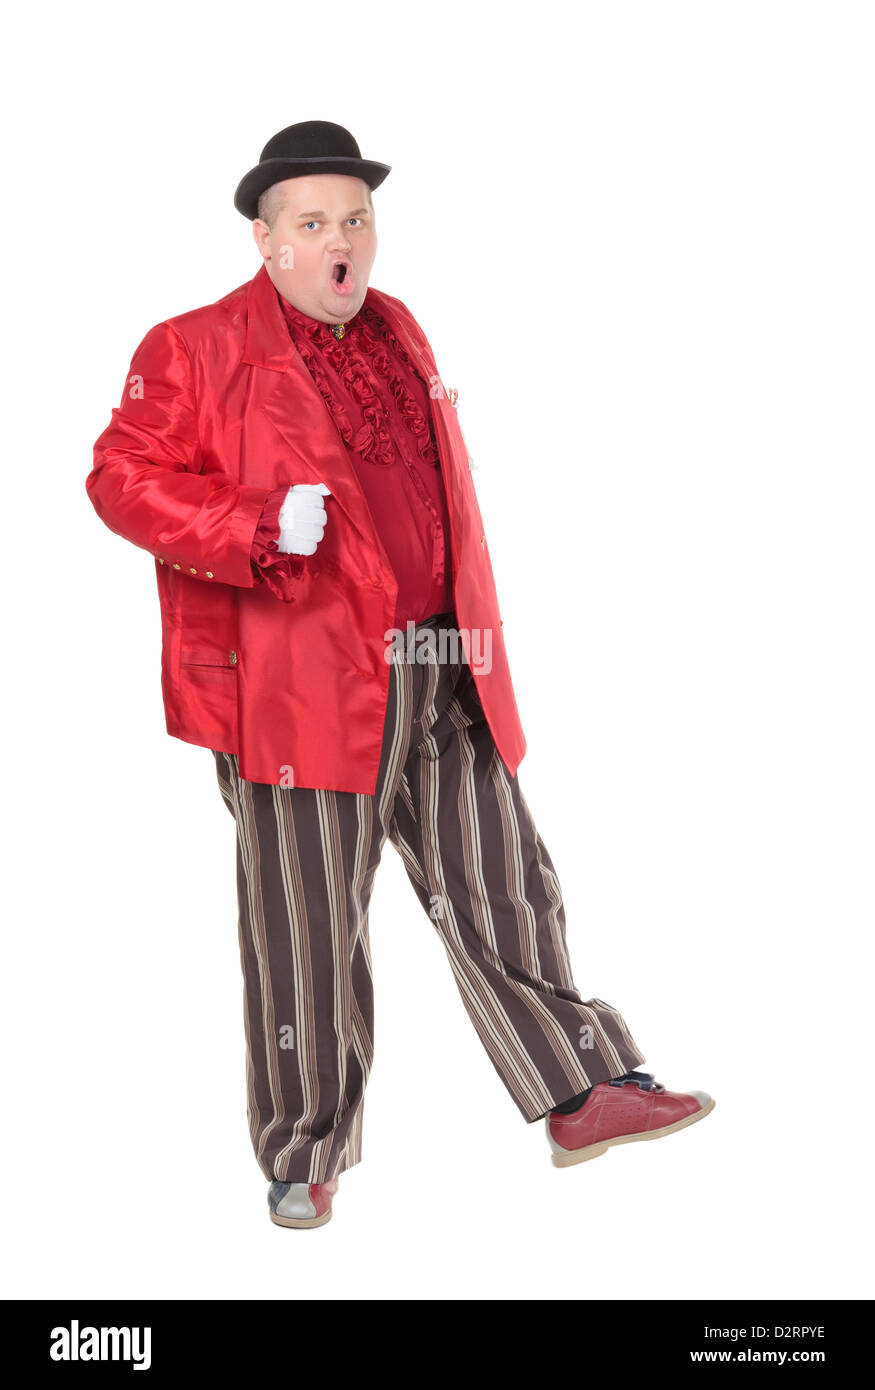 Very fat man in a red entertainer's costume and bowler hat, isolated on white Stock Photo